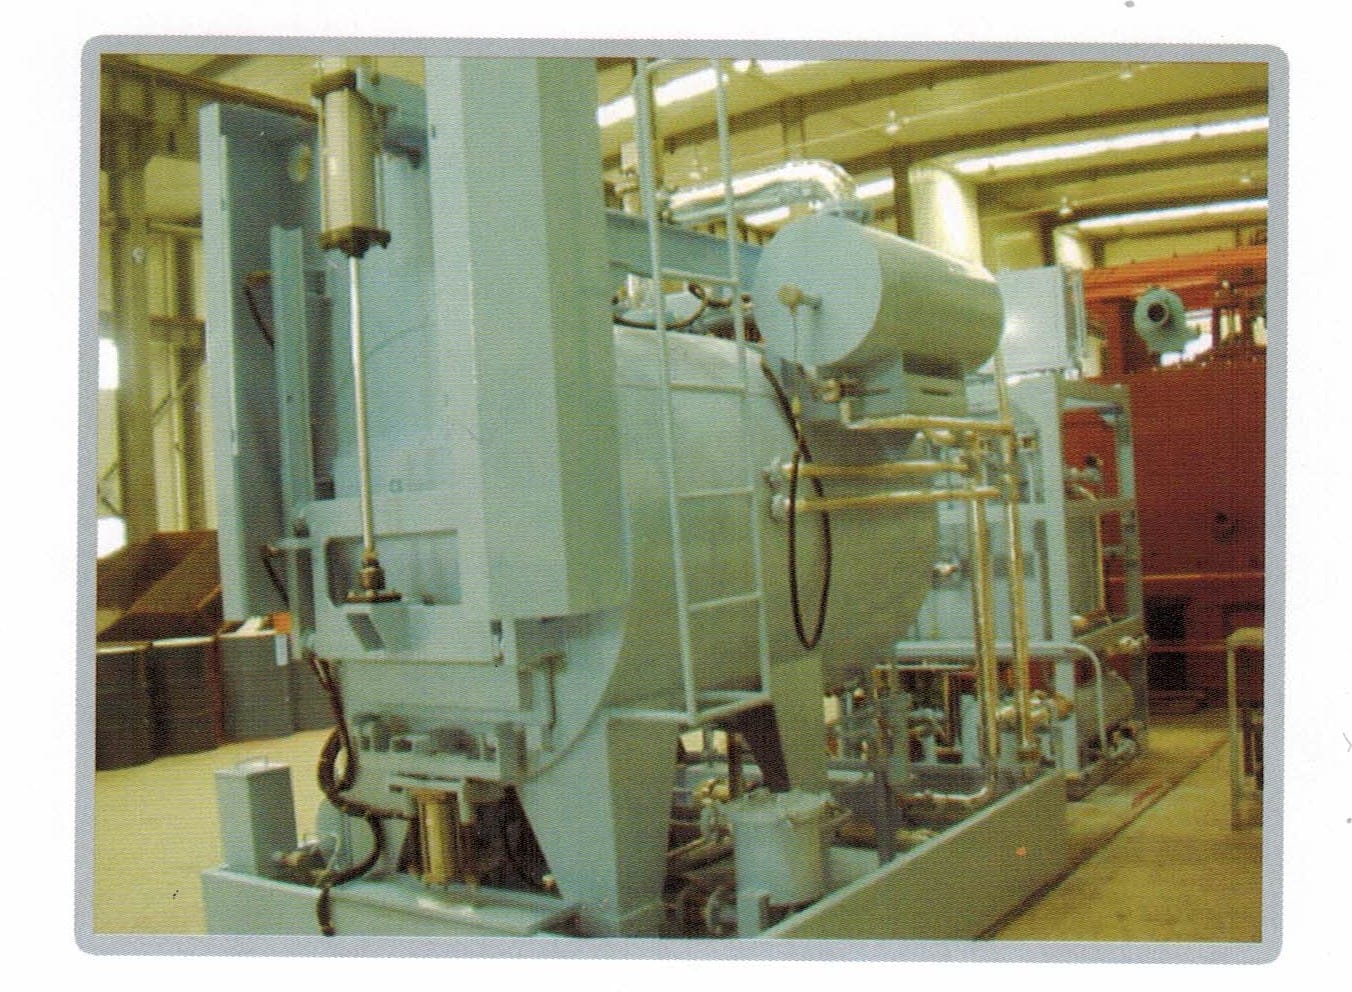 Vacuum cleaning furnace